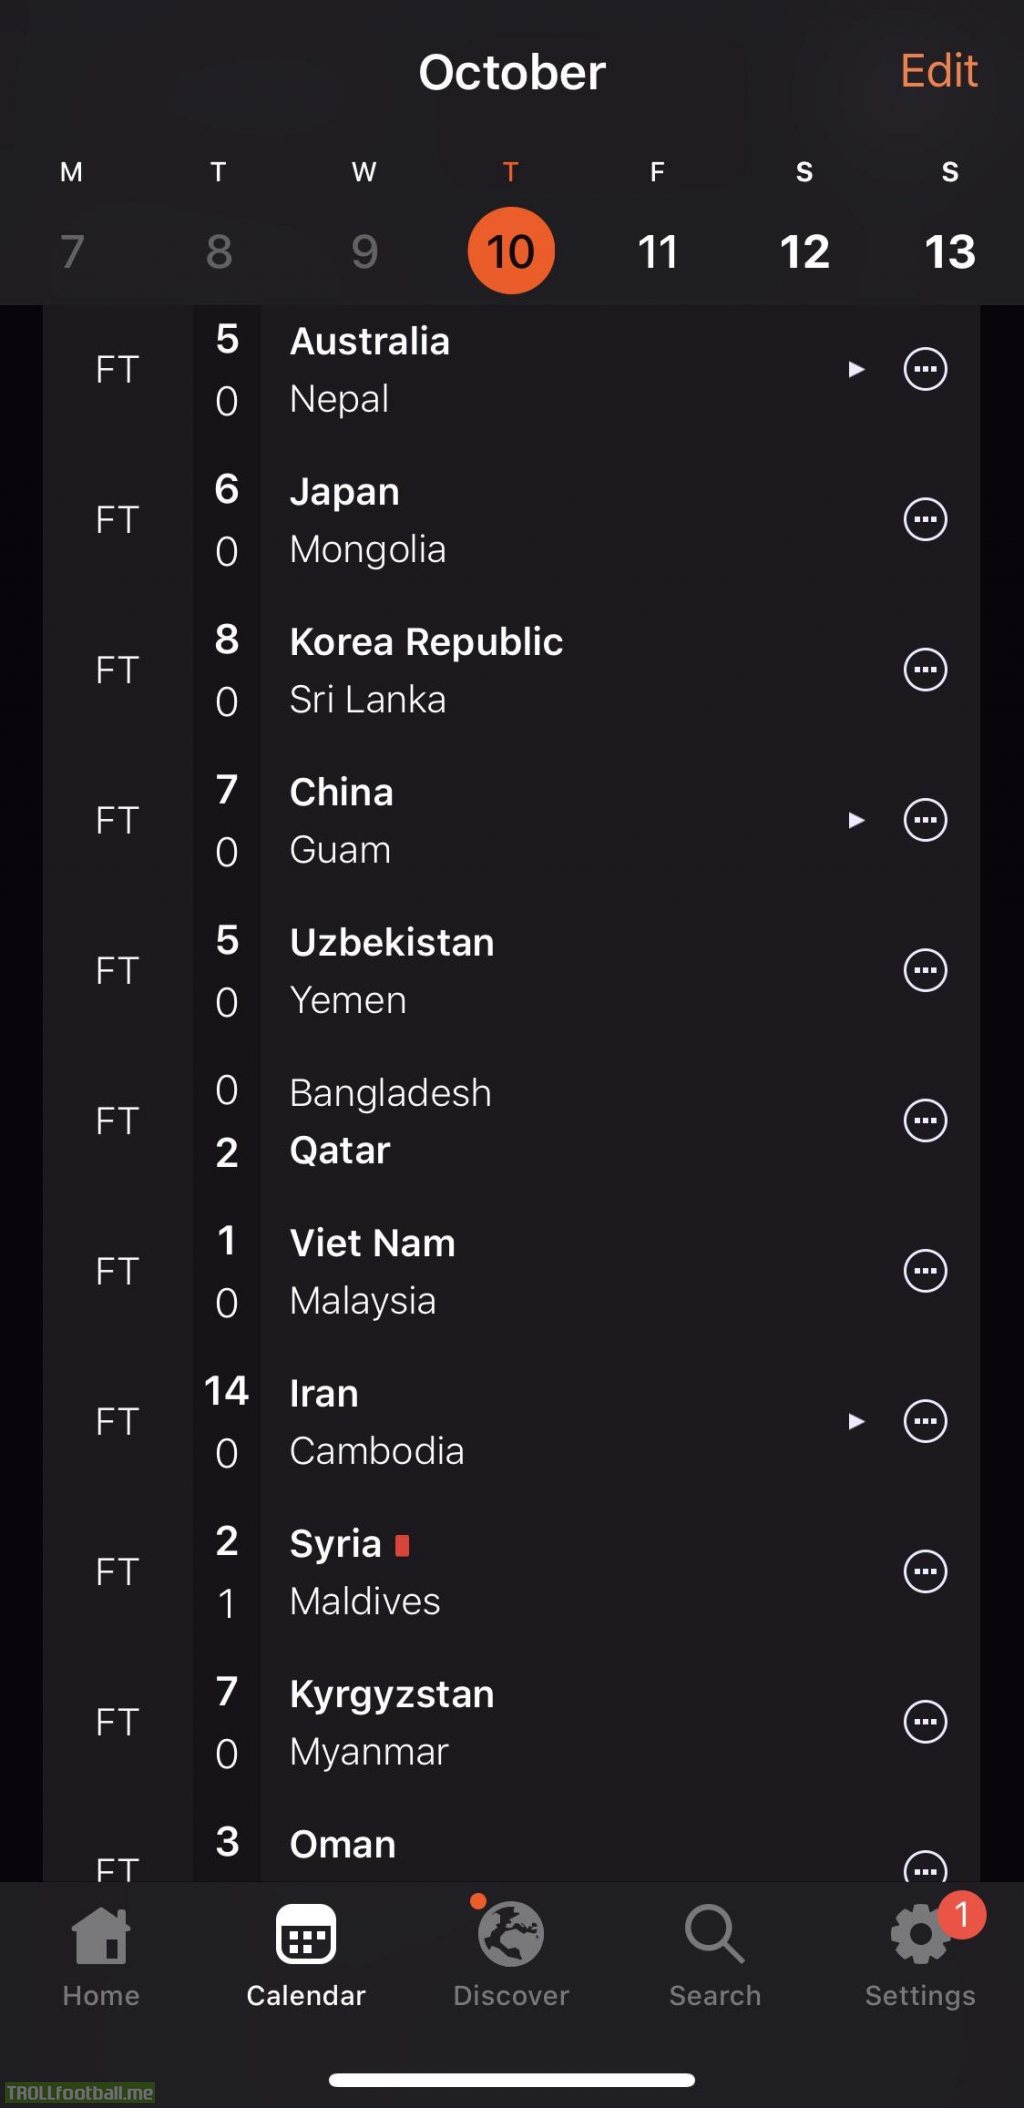 Results From The World Cup Qualifying Round Asia Troll Football